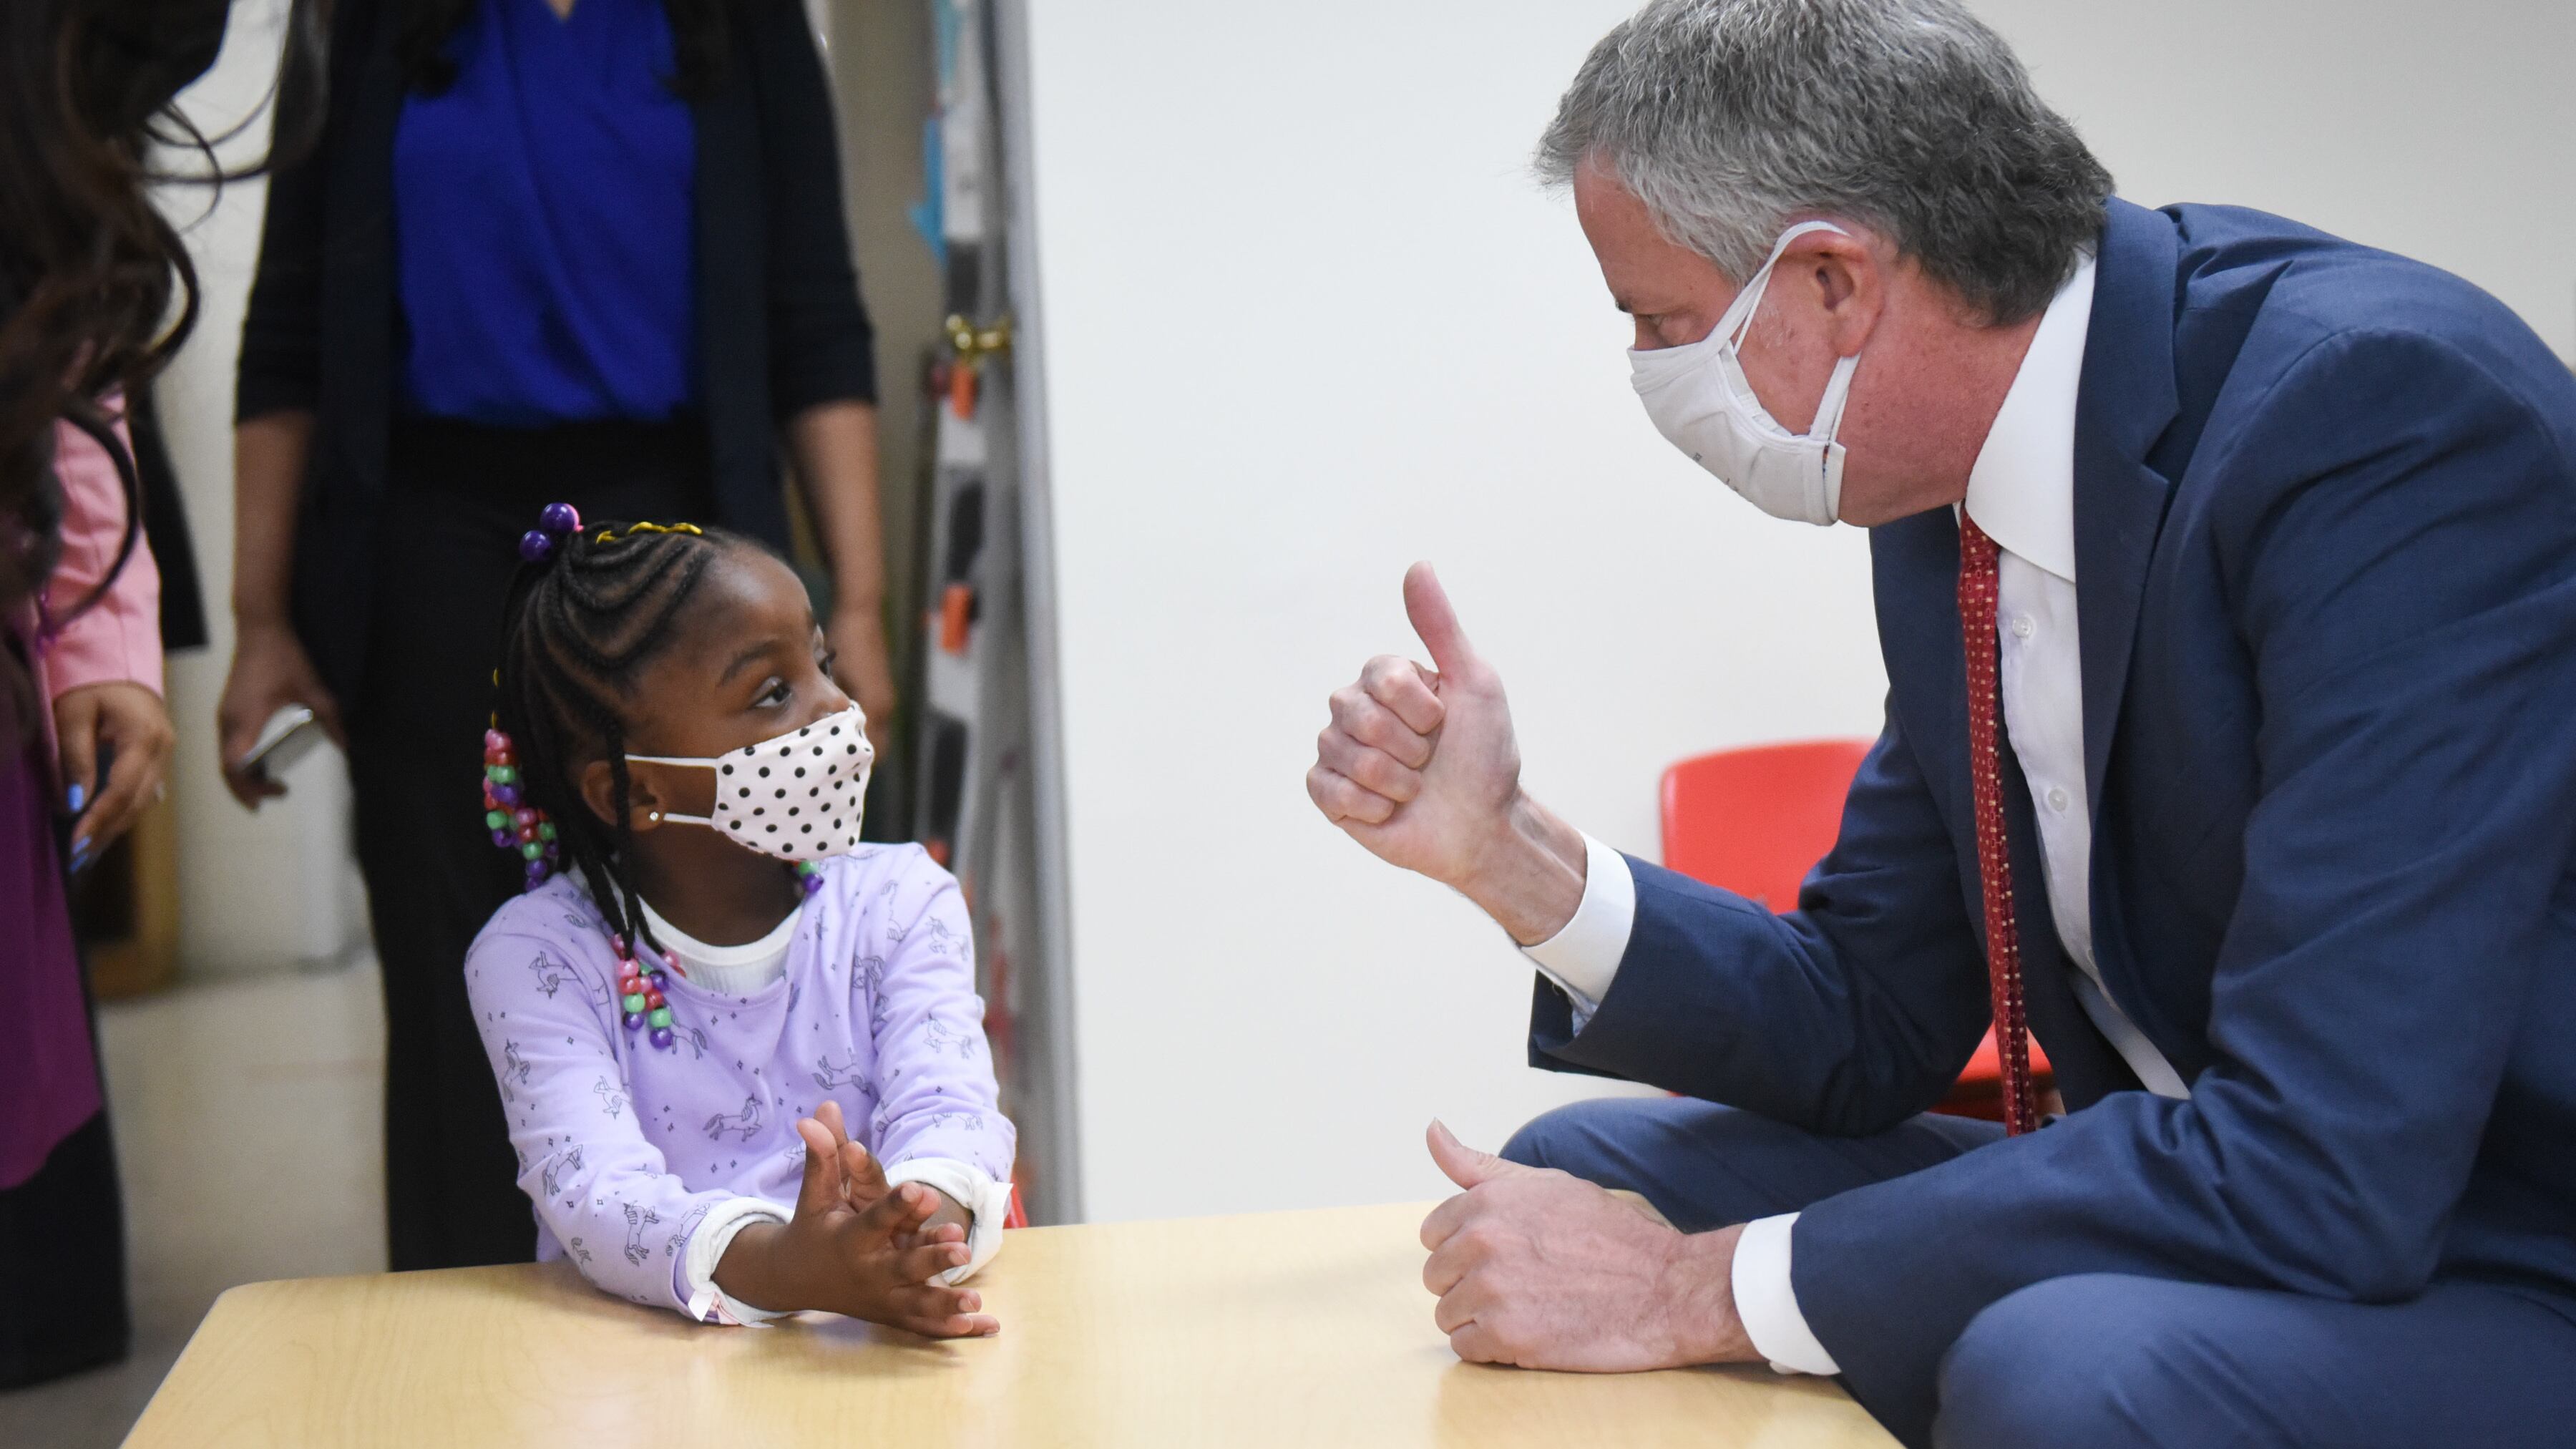 Mayor Bill de Blasio Chancellor Porter will join school leadership at Phyl’s Academy in Brooklyn to announce 3K for all and visit Pre-K students in class March 23, 2021. Michael Appleton/Mayoral Photography Office